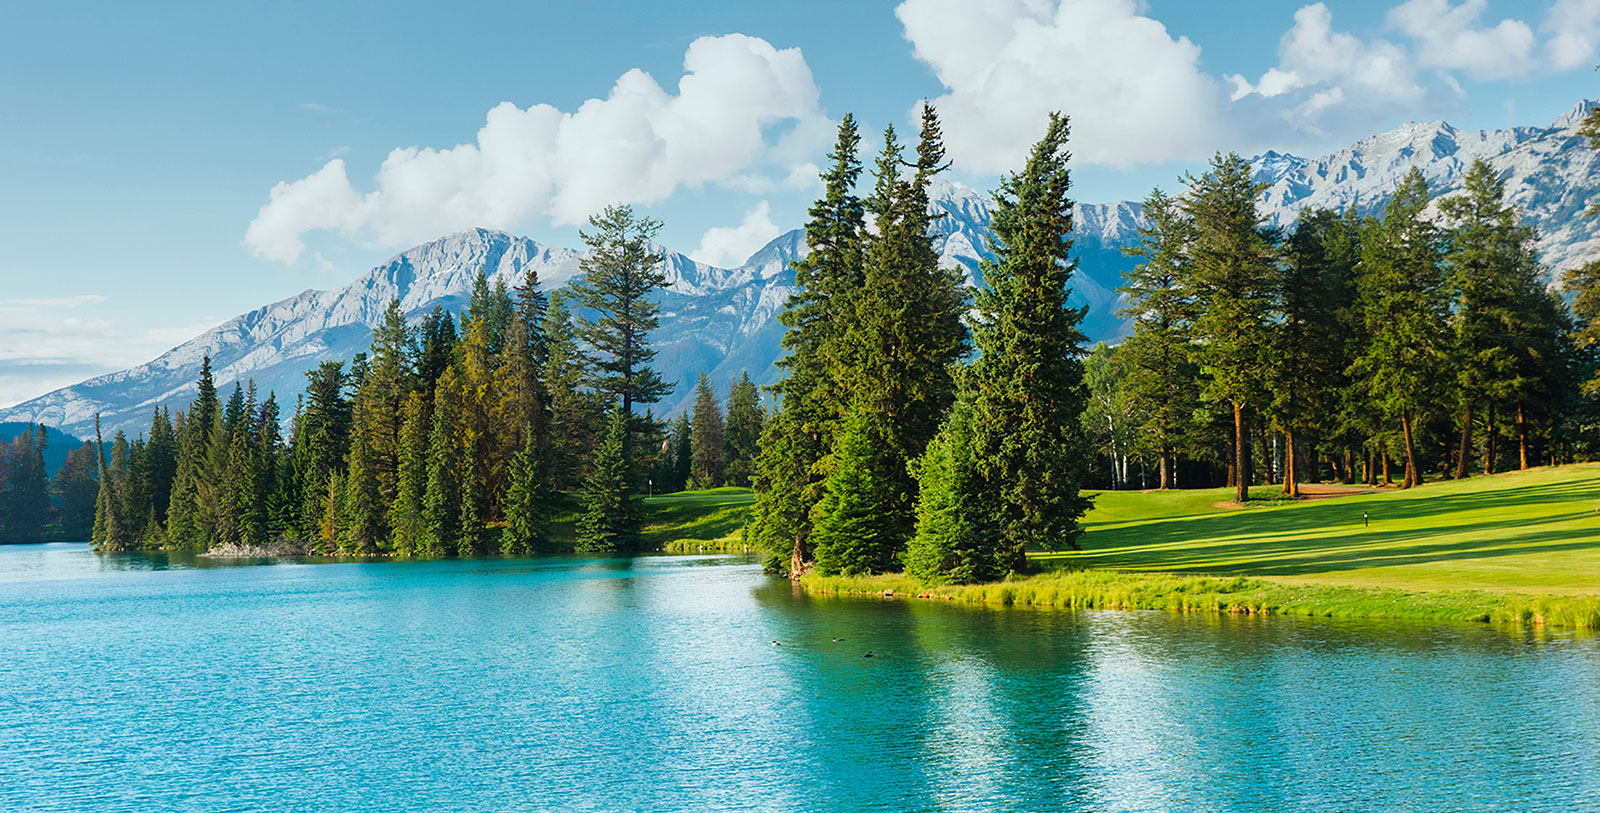 Experience the many natural wonders located nearby at Jasper National Park, a UNESCO World Heritage Site.